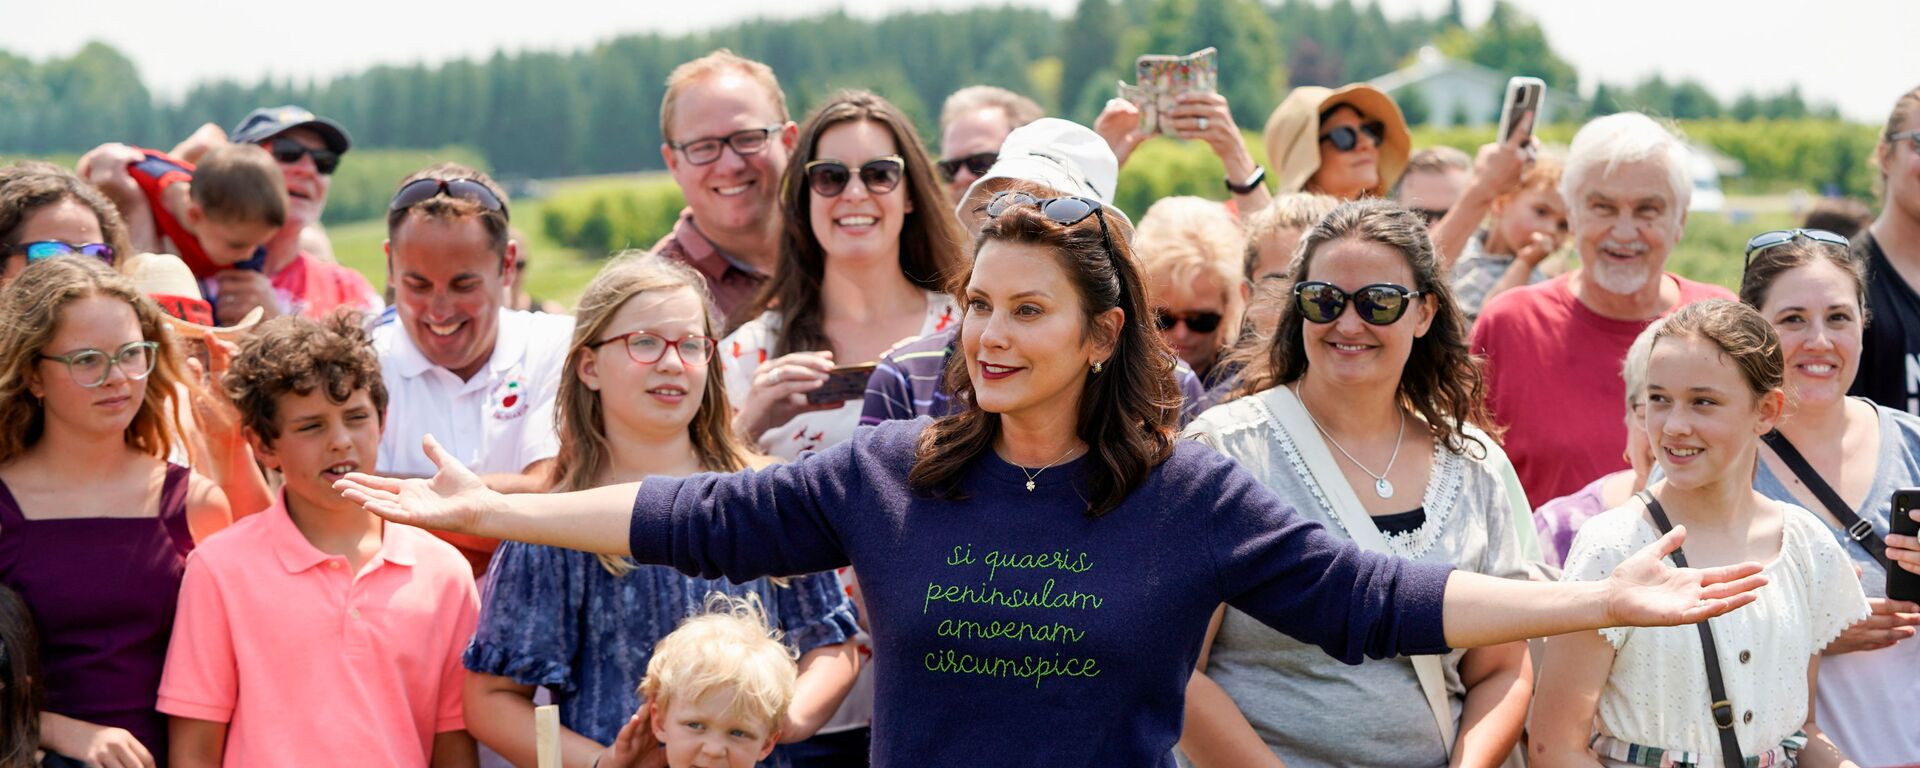 Michigan's Governor Gretchen Whitmer gestures in front of supporters after touring King Orchards farm in Central Lake, Michigan, 3 July 2021. - Sputnik International, 1920, 24.07.2021